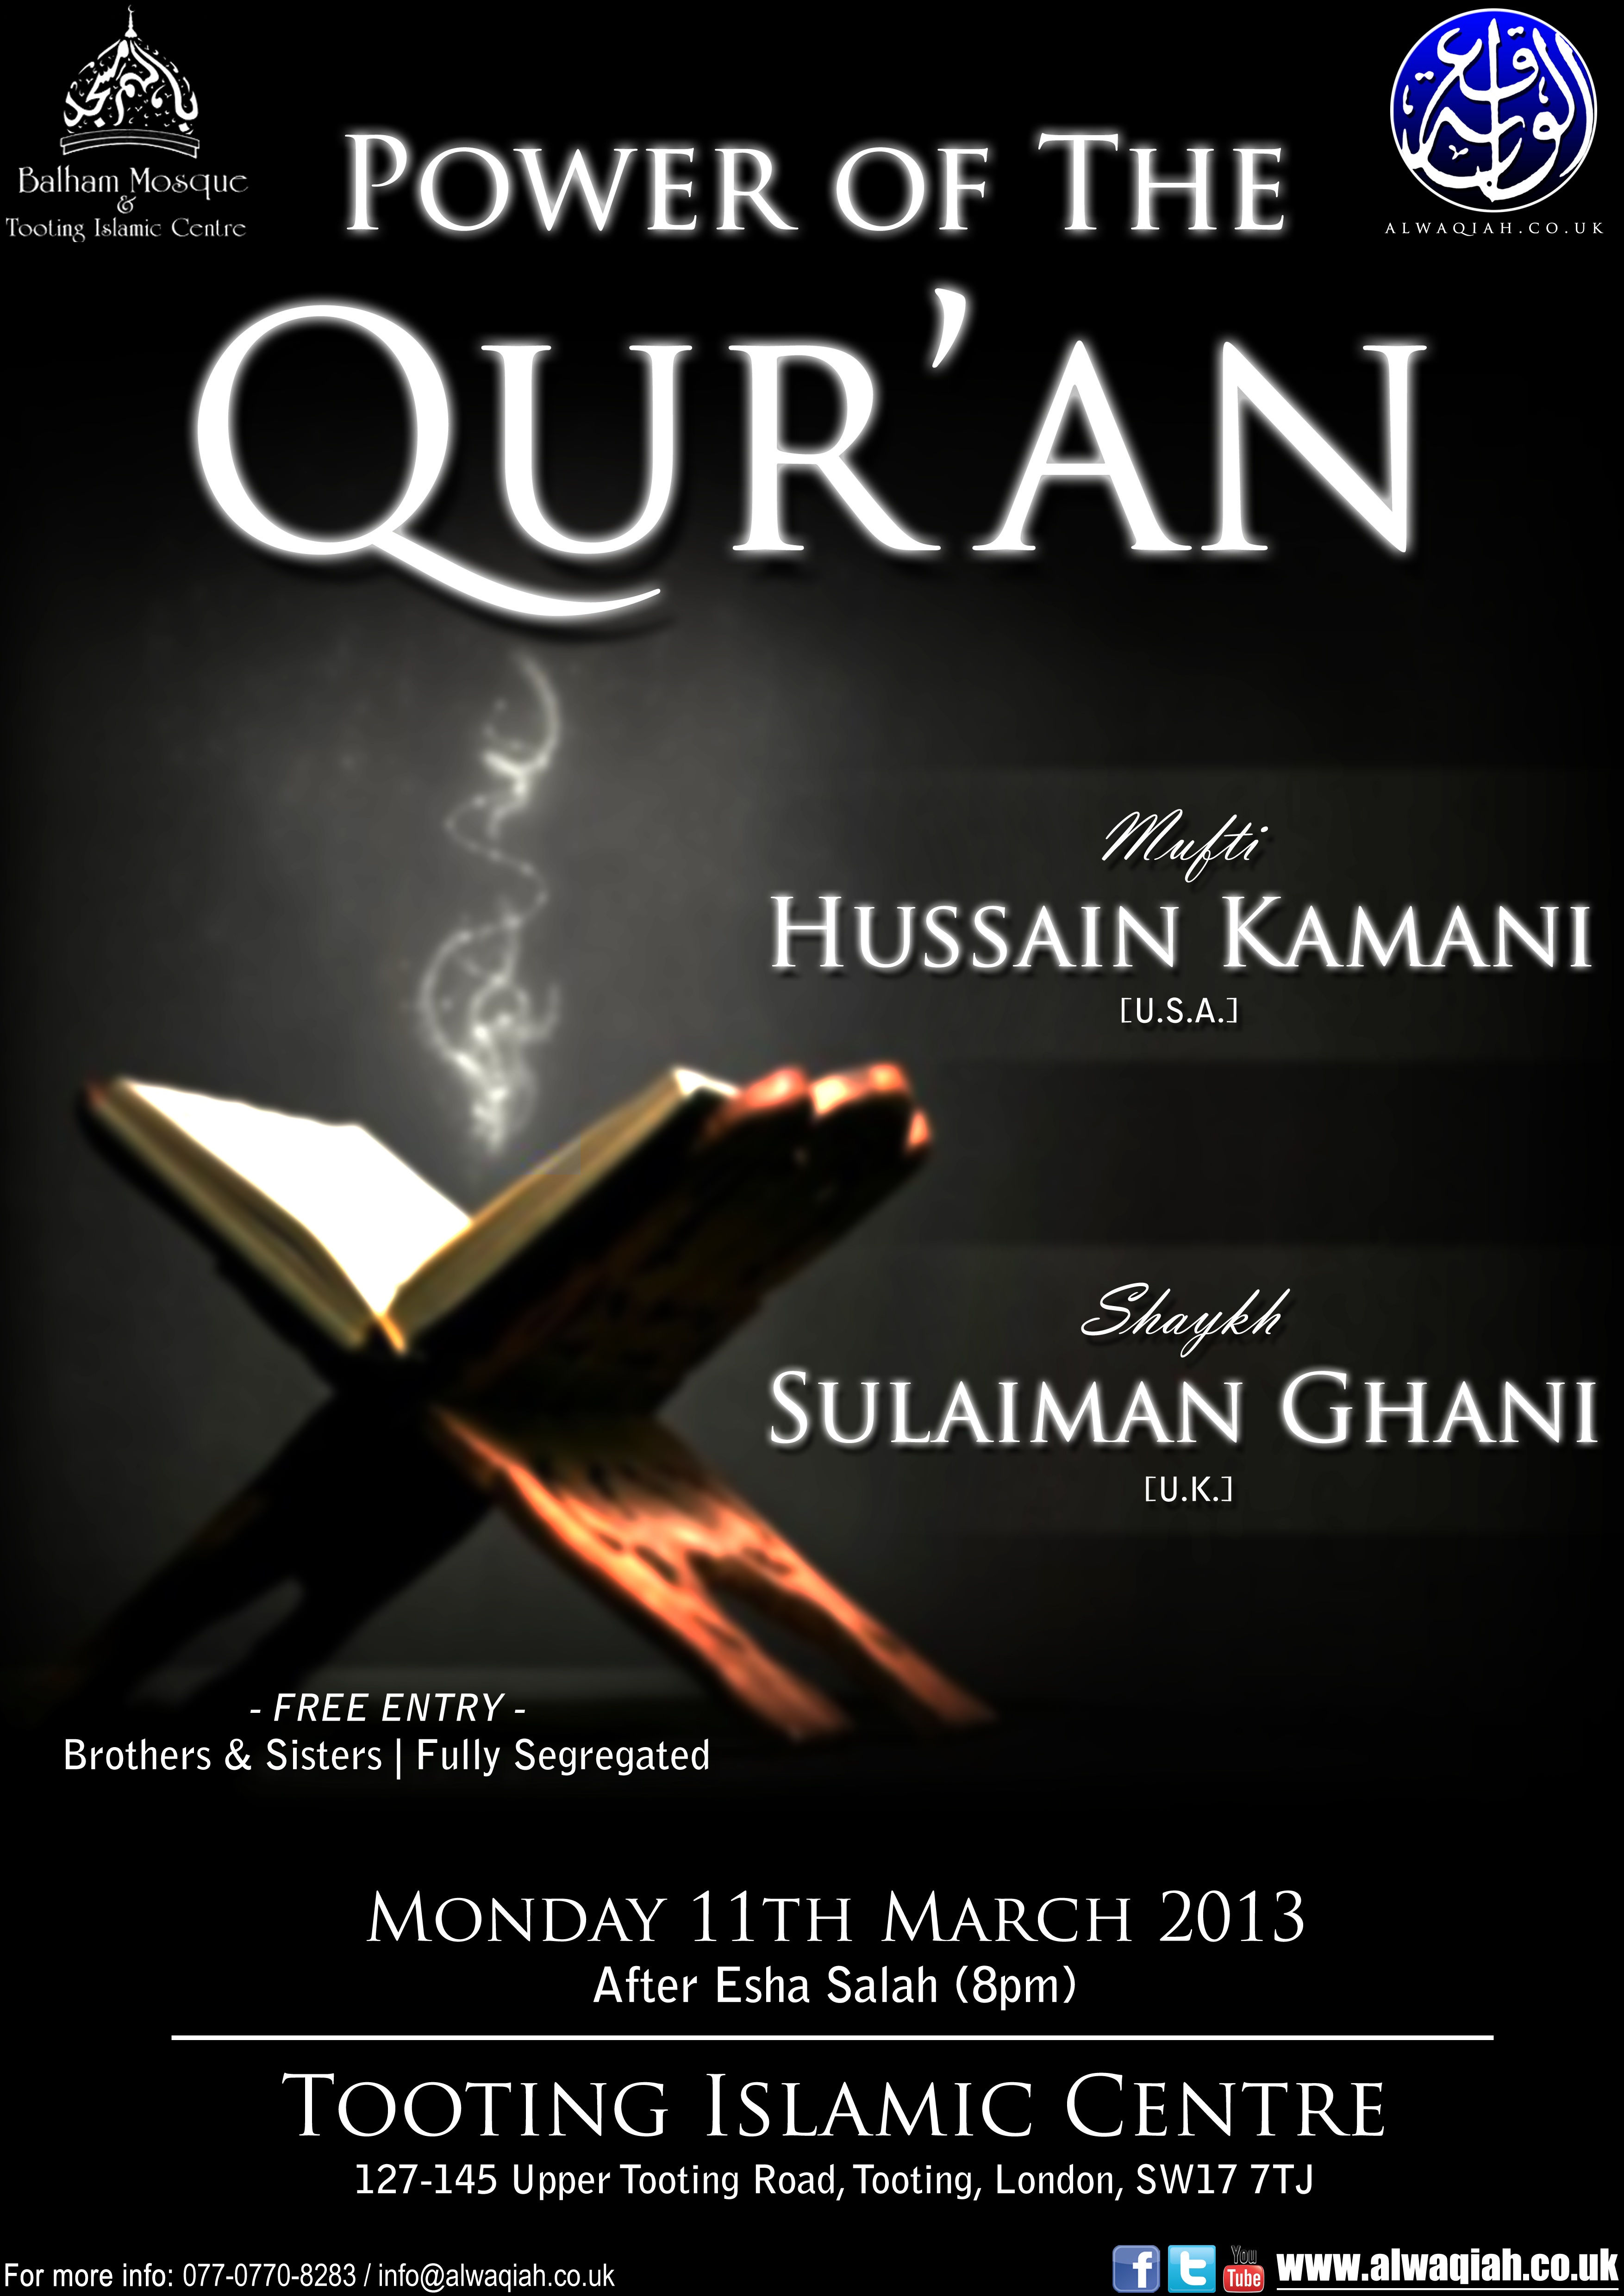 POWER OF THE QUR'AN | Mufti Hussain Kamani & Shaykh Sulaiman Ghani